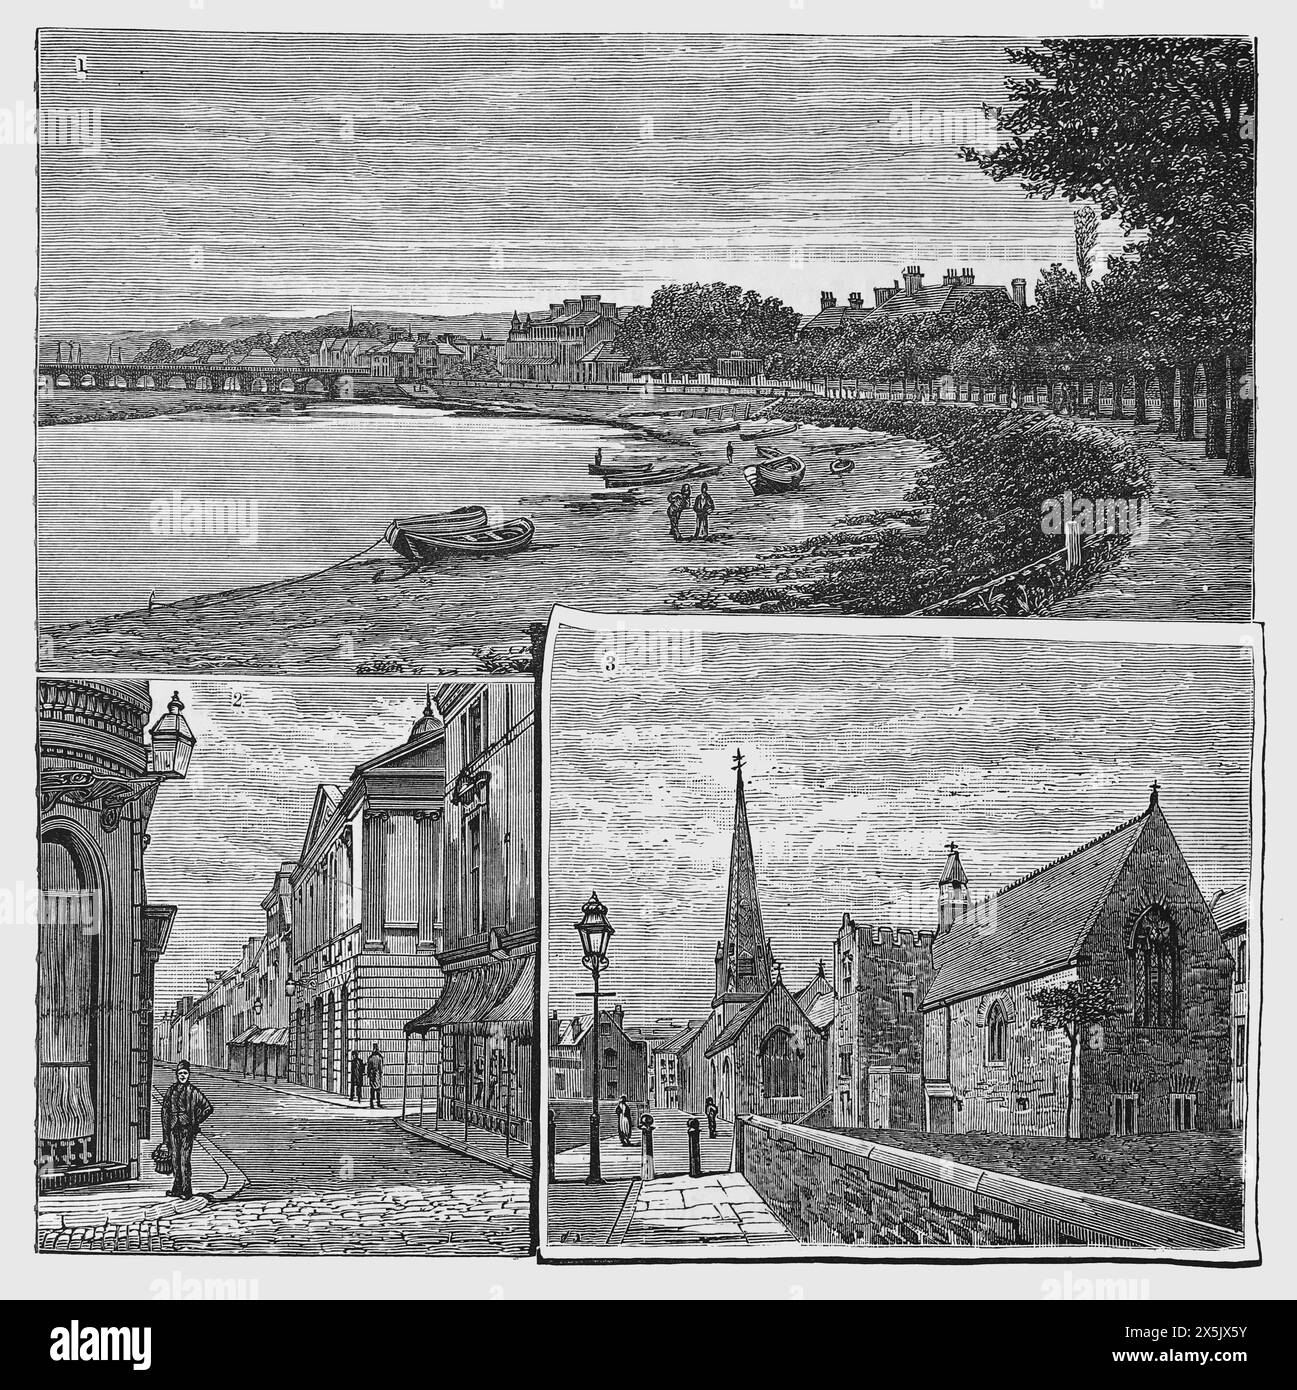 Scenes in Barnstaple in North Devon in the late 19th century. 1. The Long Bridge from the South Walk. 2. The Guildhall and High Street. 3. The Grammar School and Parish Church. Black and White Illustration from Our Own Country Vol III published by Cassell, Petter, Galpin & Co. in the late 19th century. Stock Photo